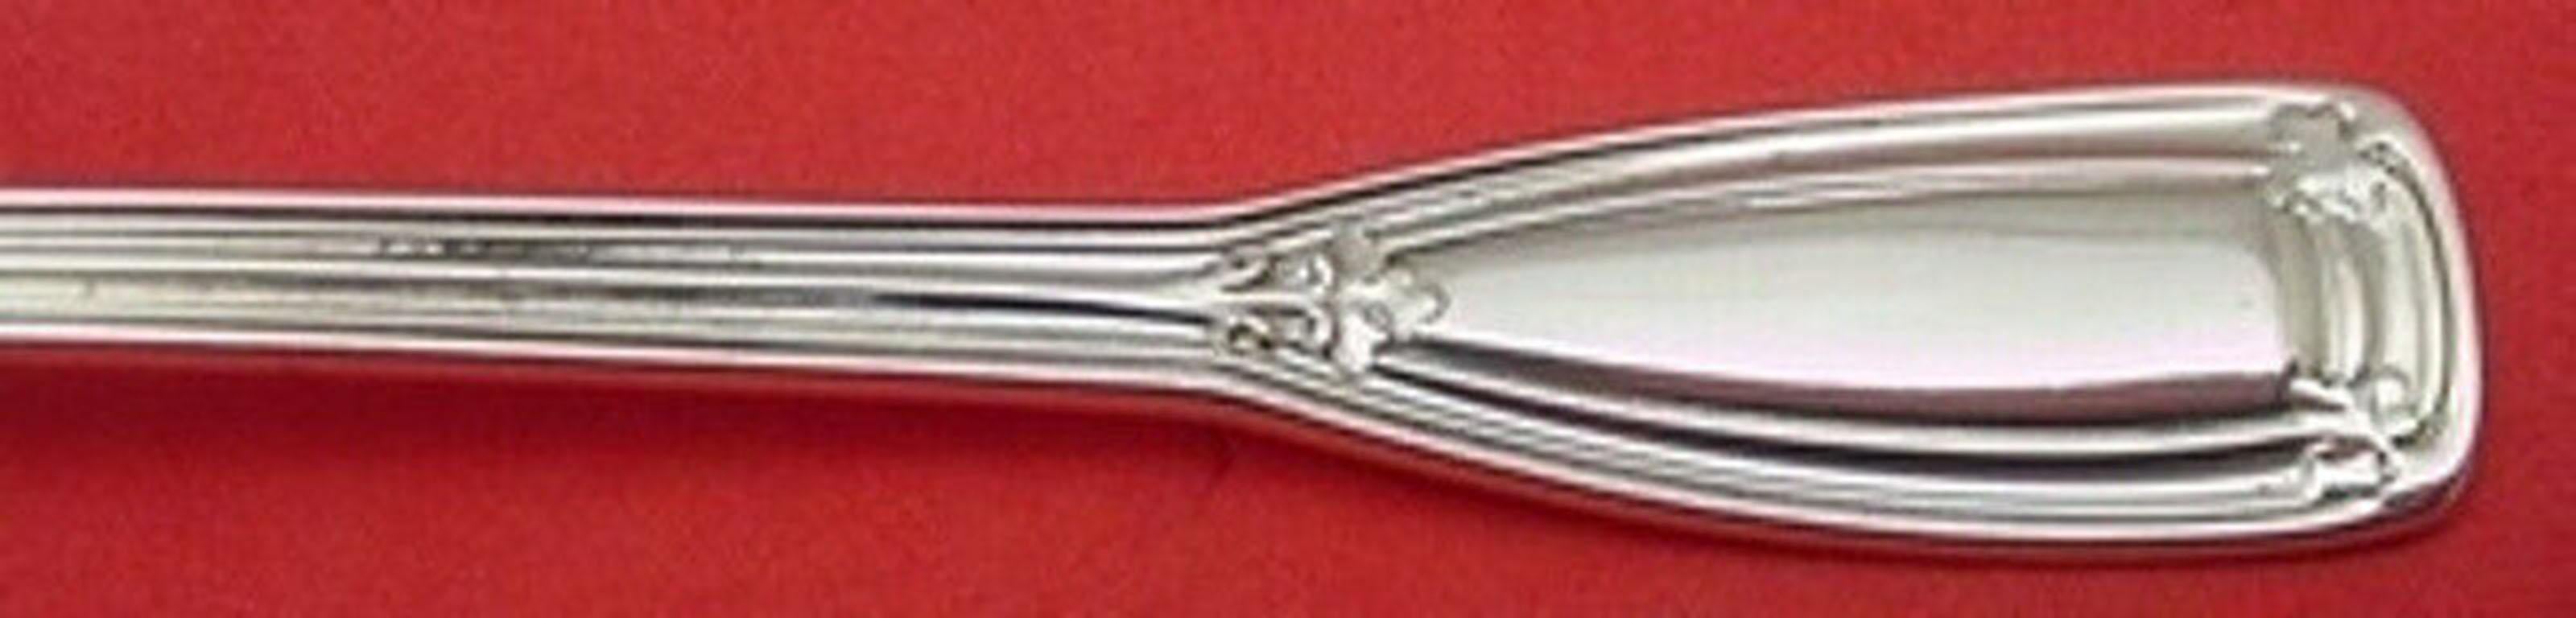 Sterling silver place soup spoon 7